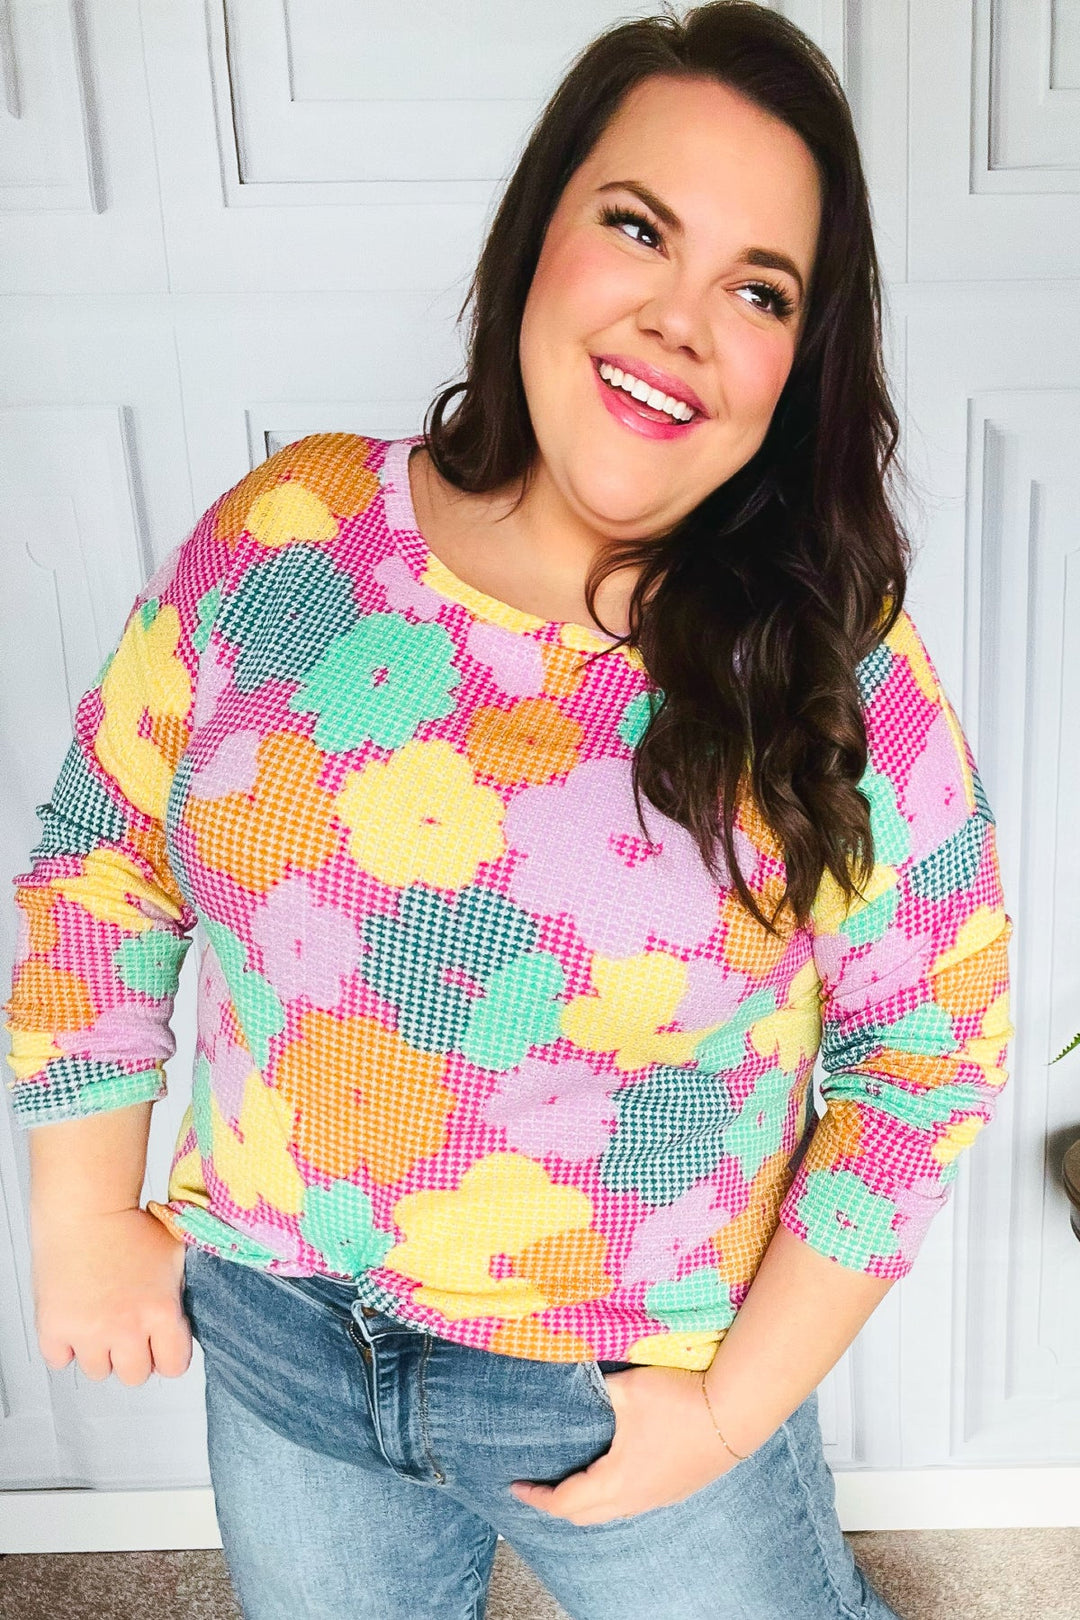 Feeling Bold - Floral Vintage-Style Top